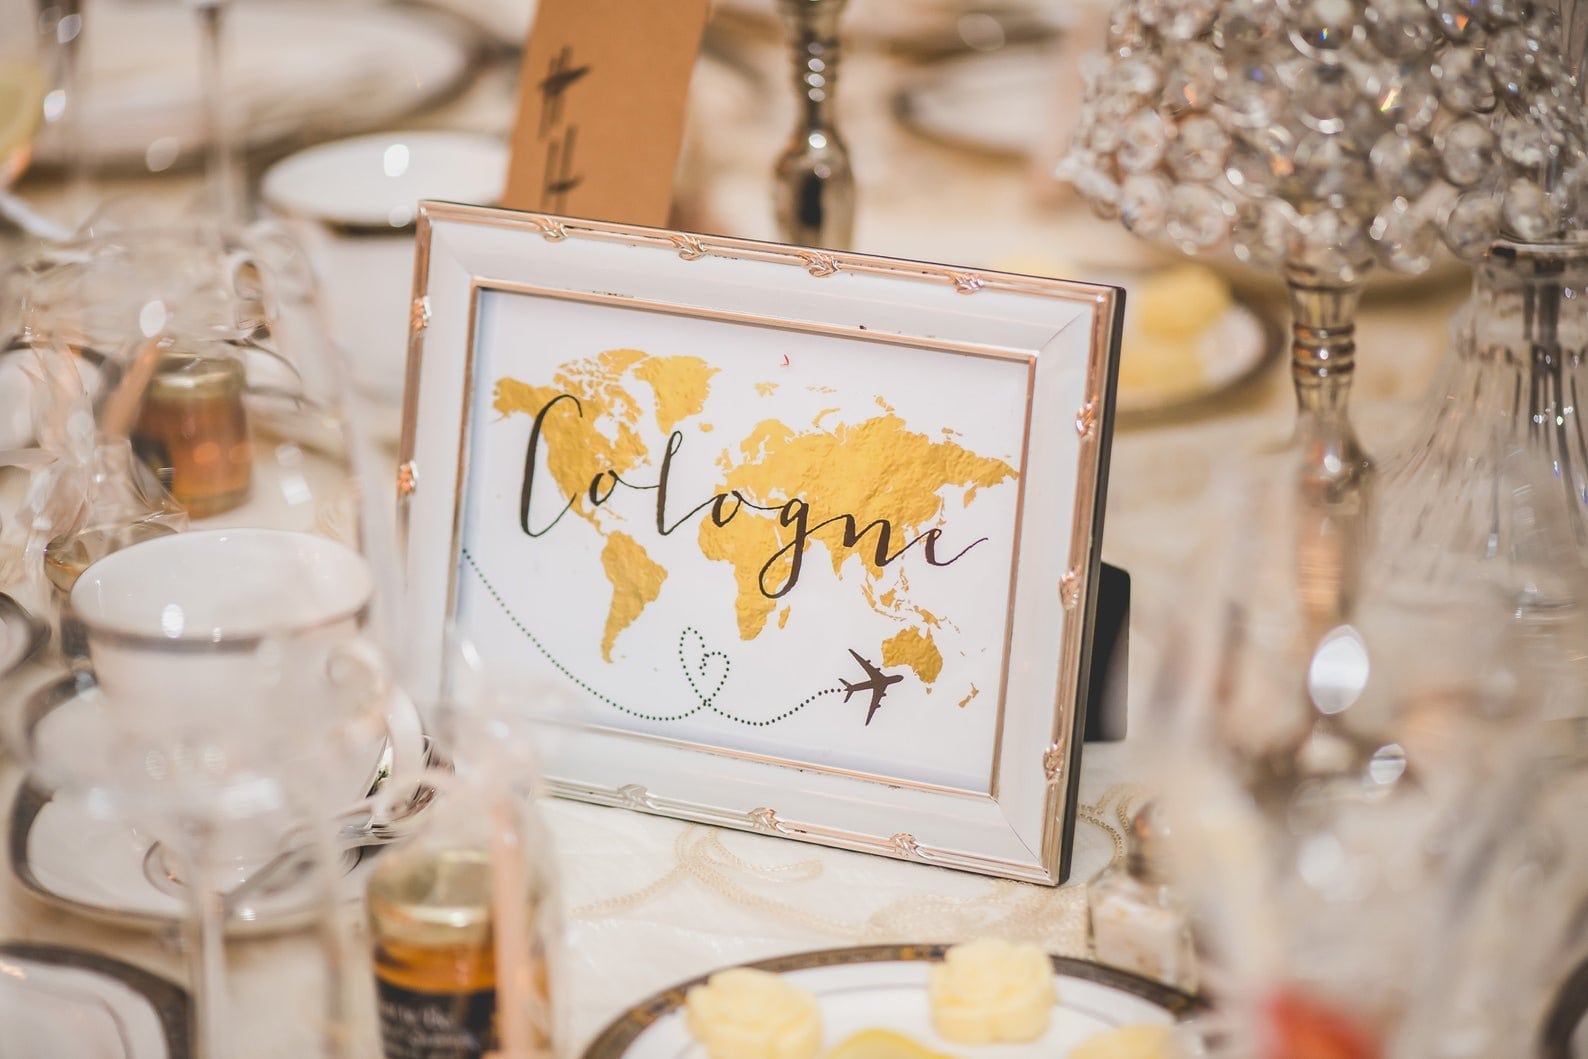 Unique Creative Wedding Table Name Signs from Etsy